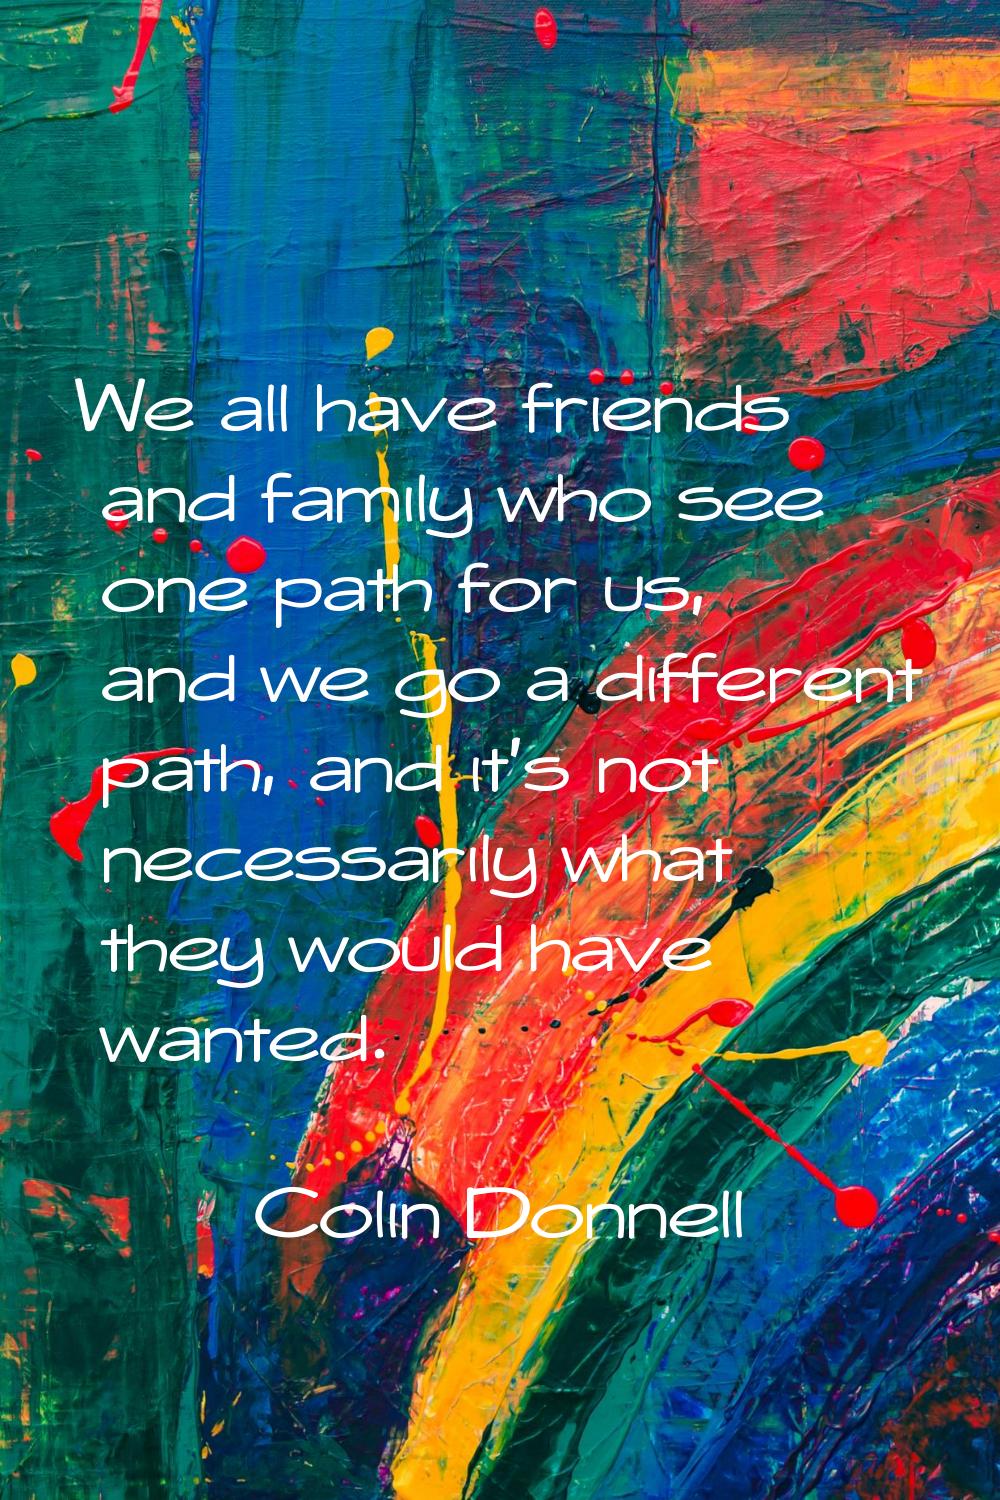 We all have friends and family who see one path for us, and we go a different path, and it's not ne